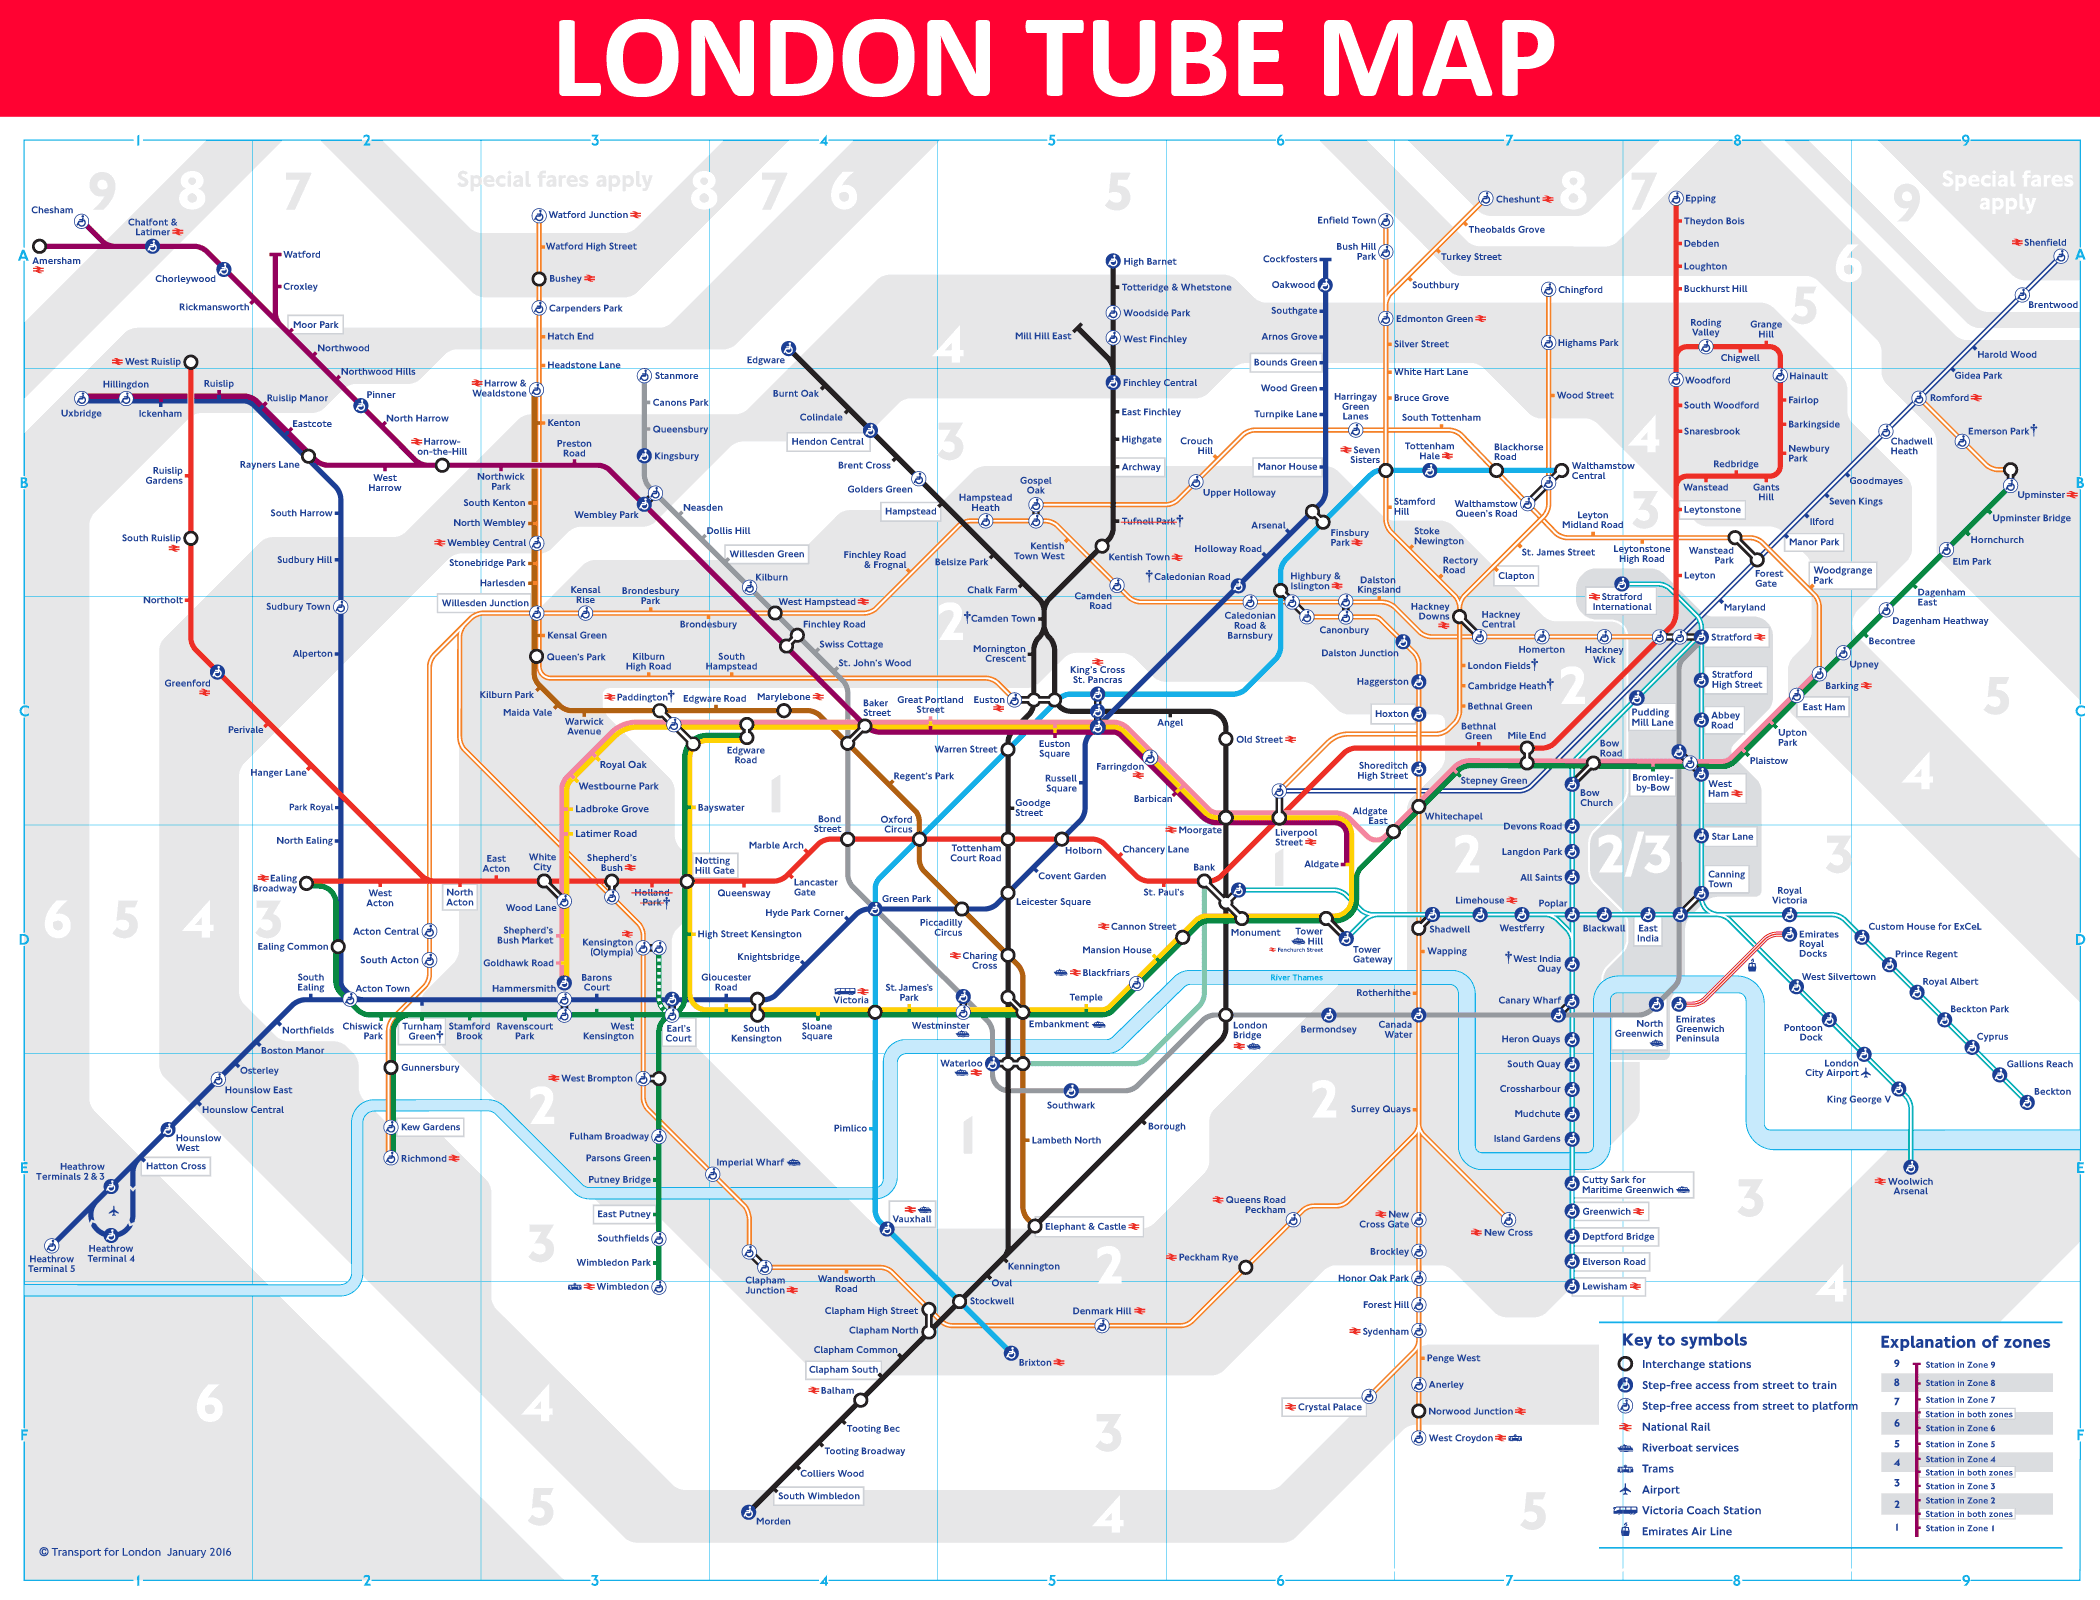 London Tube Map Underground Map And Transport Map London Tube Info